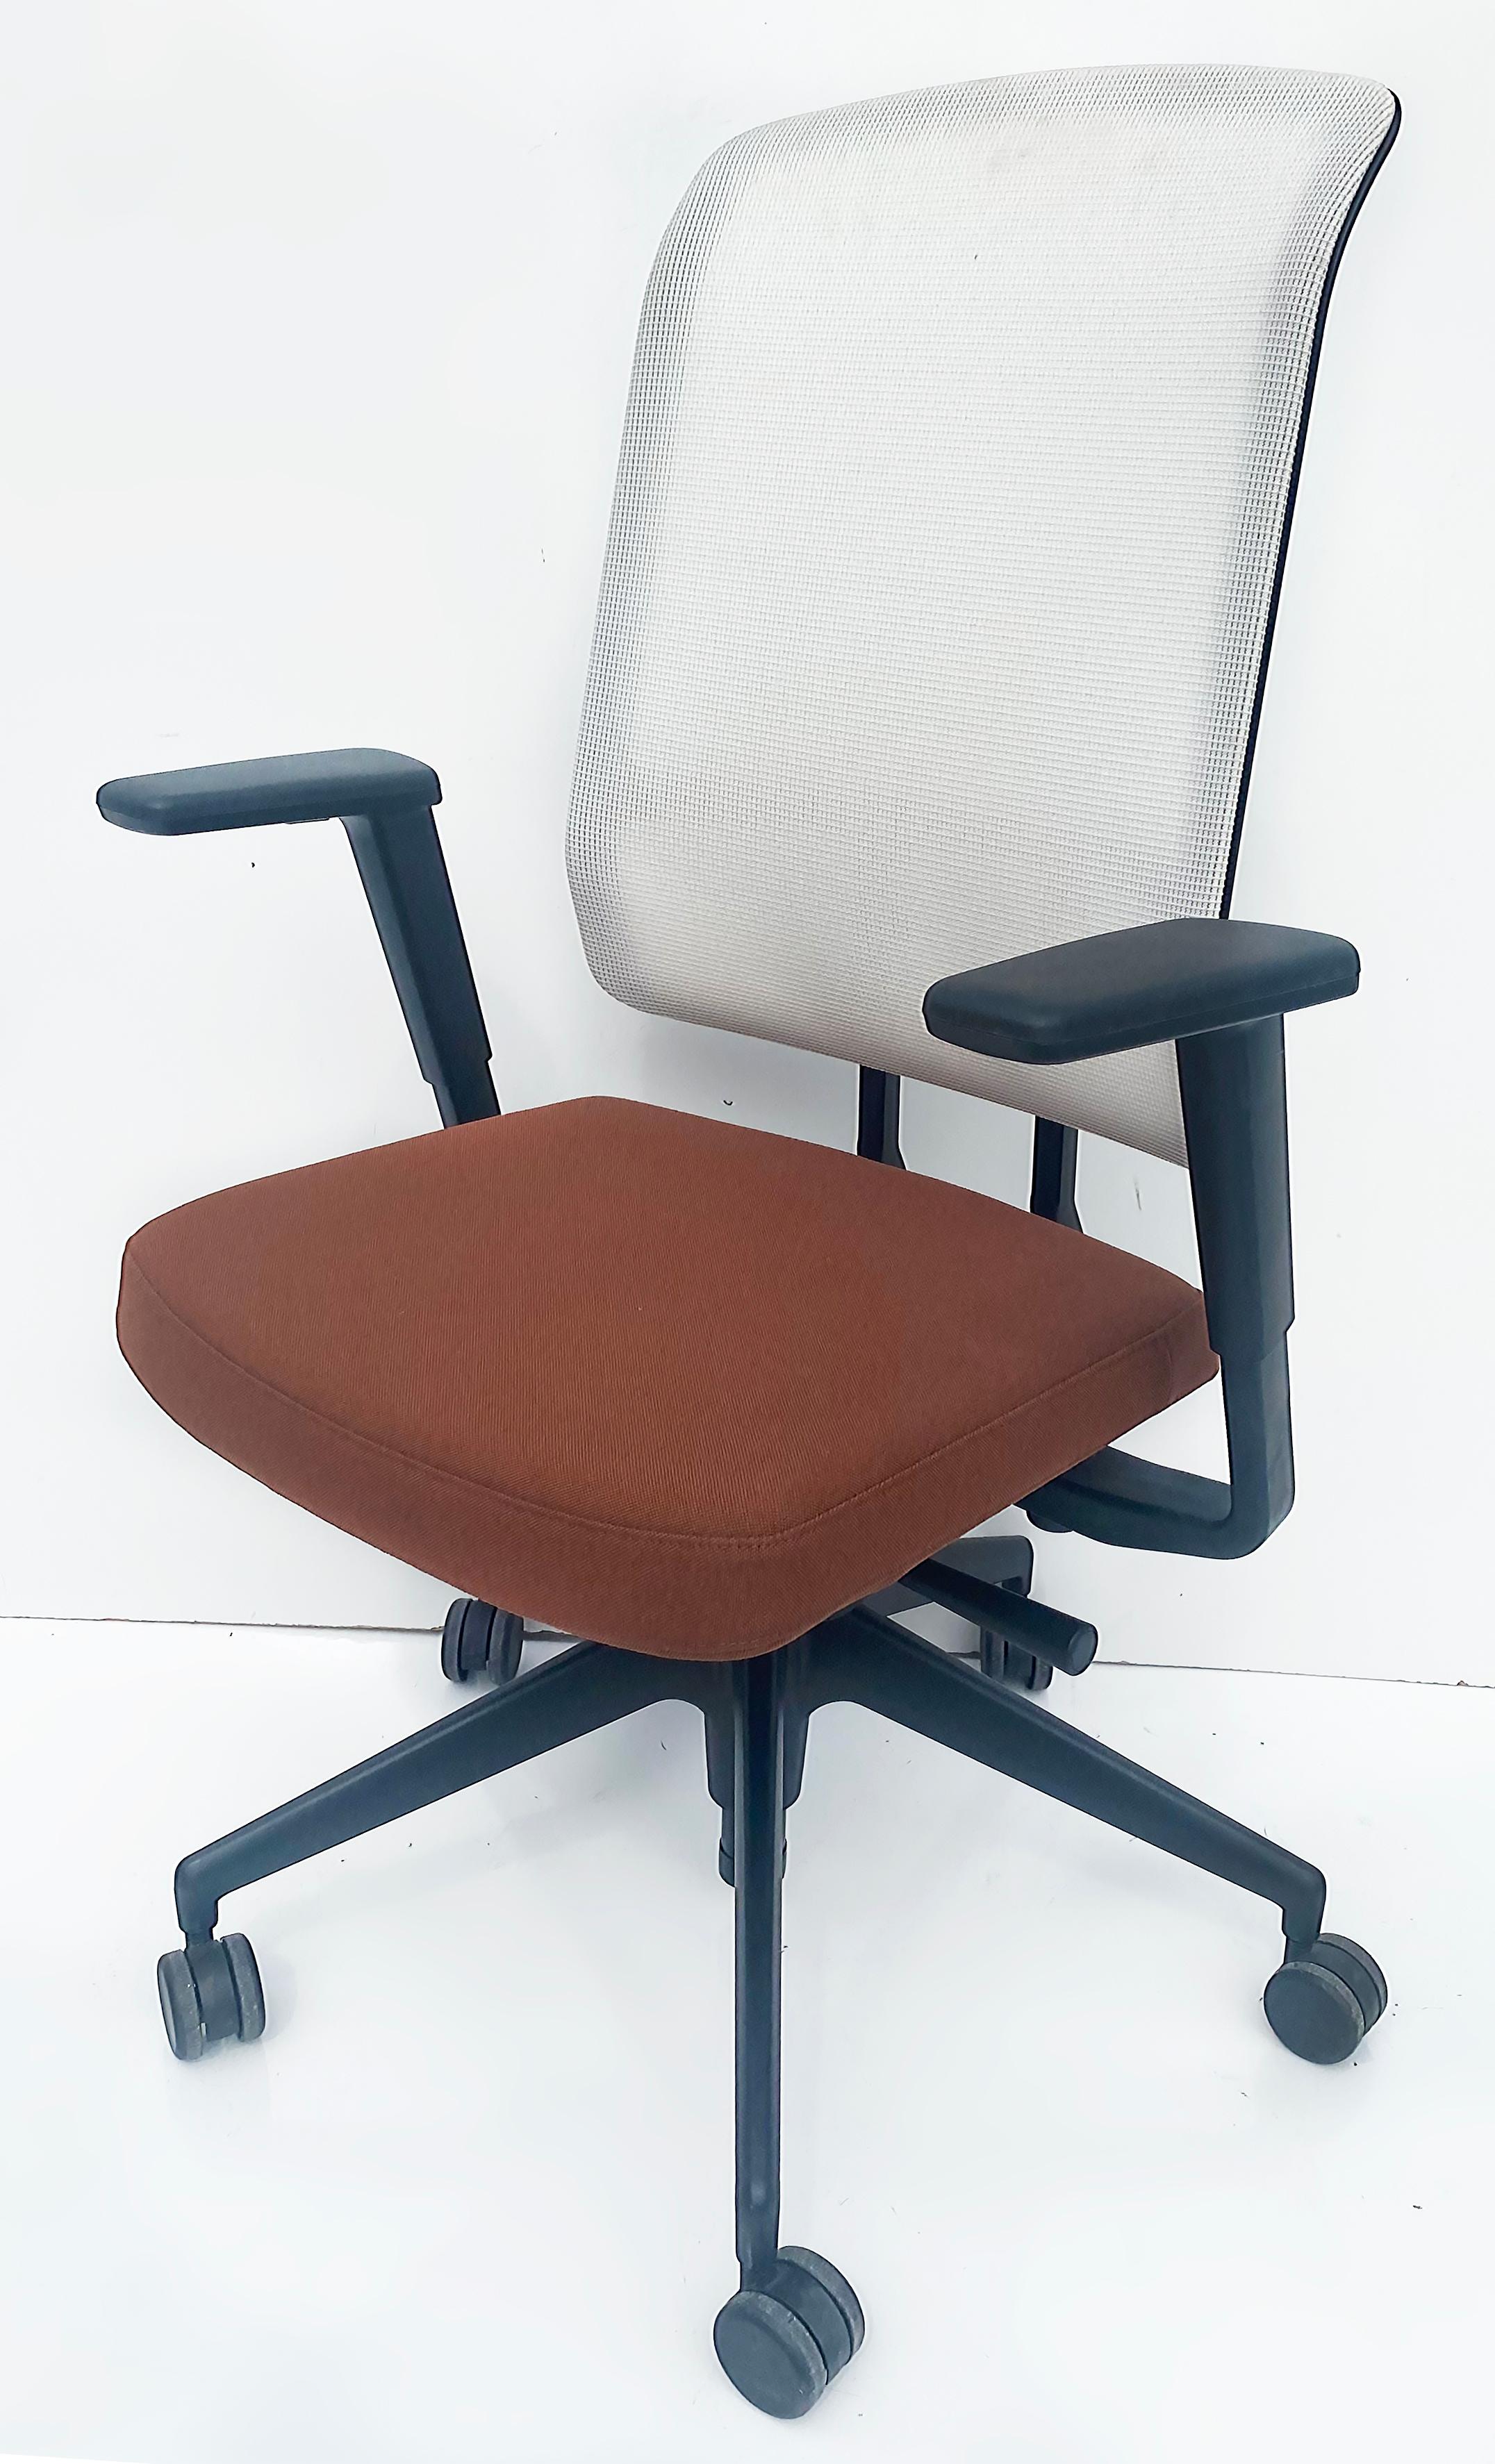 Contemporary Vitra AM Fully Adjustable Ergonomic Office Chairs by Alberto Meda 2021 For Sale